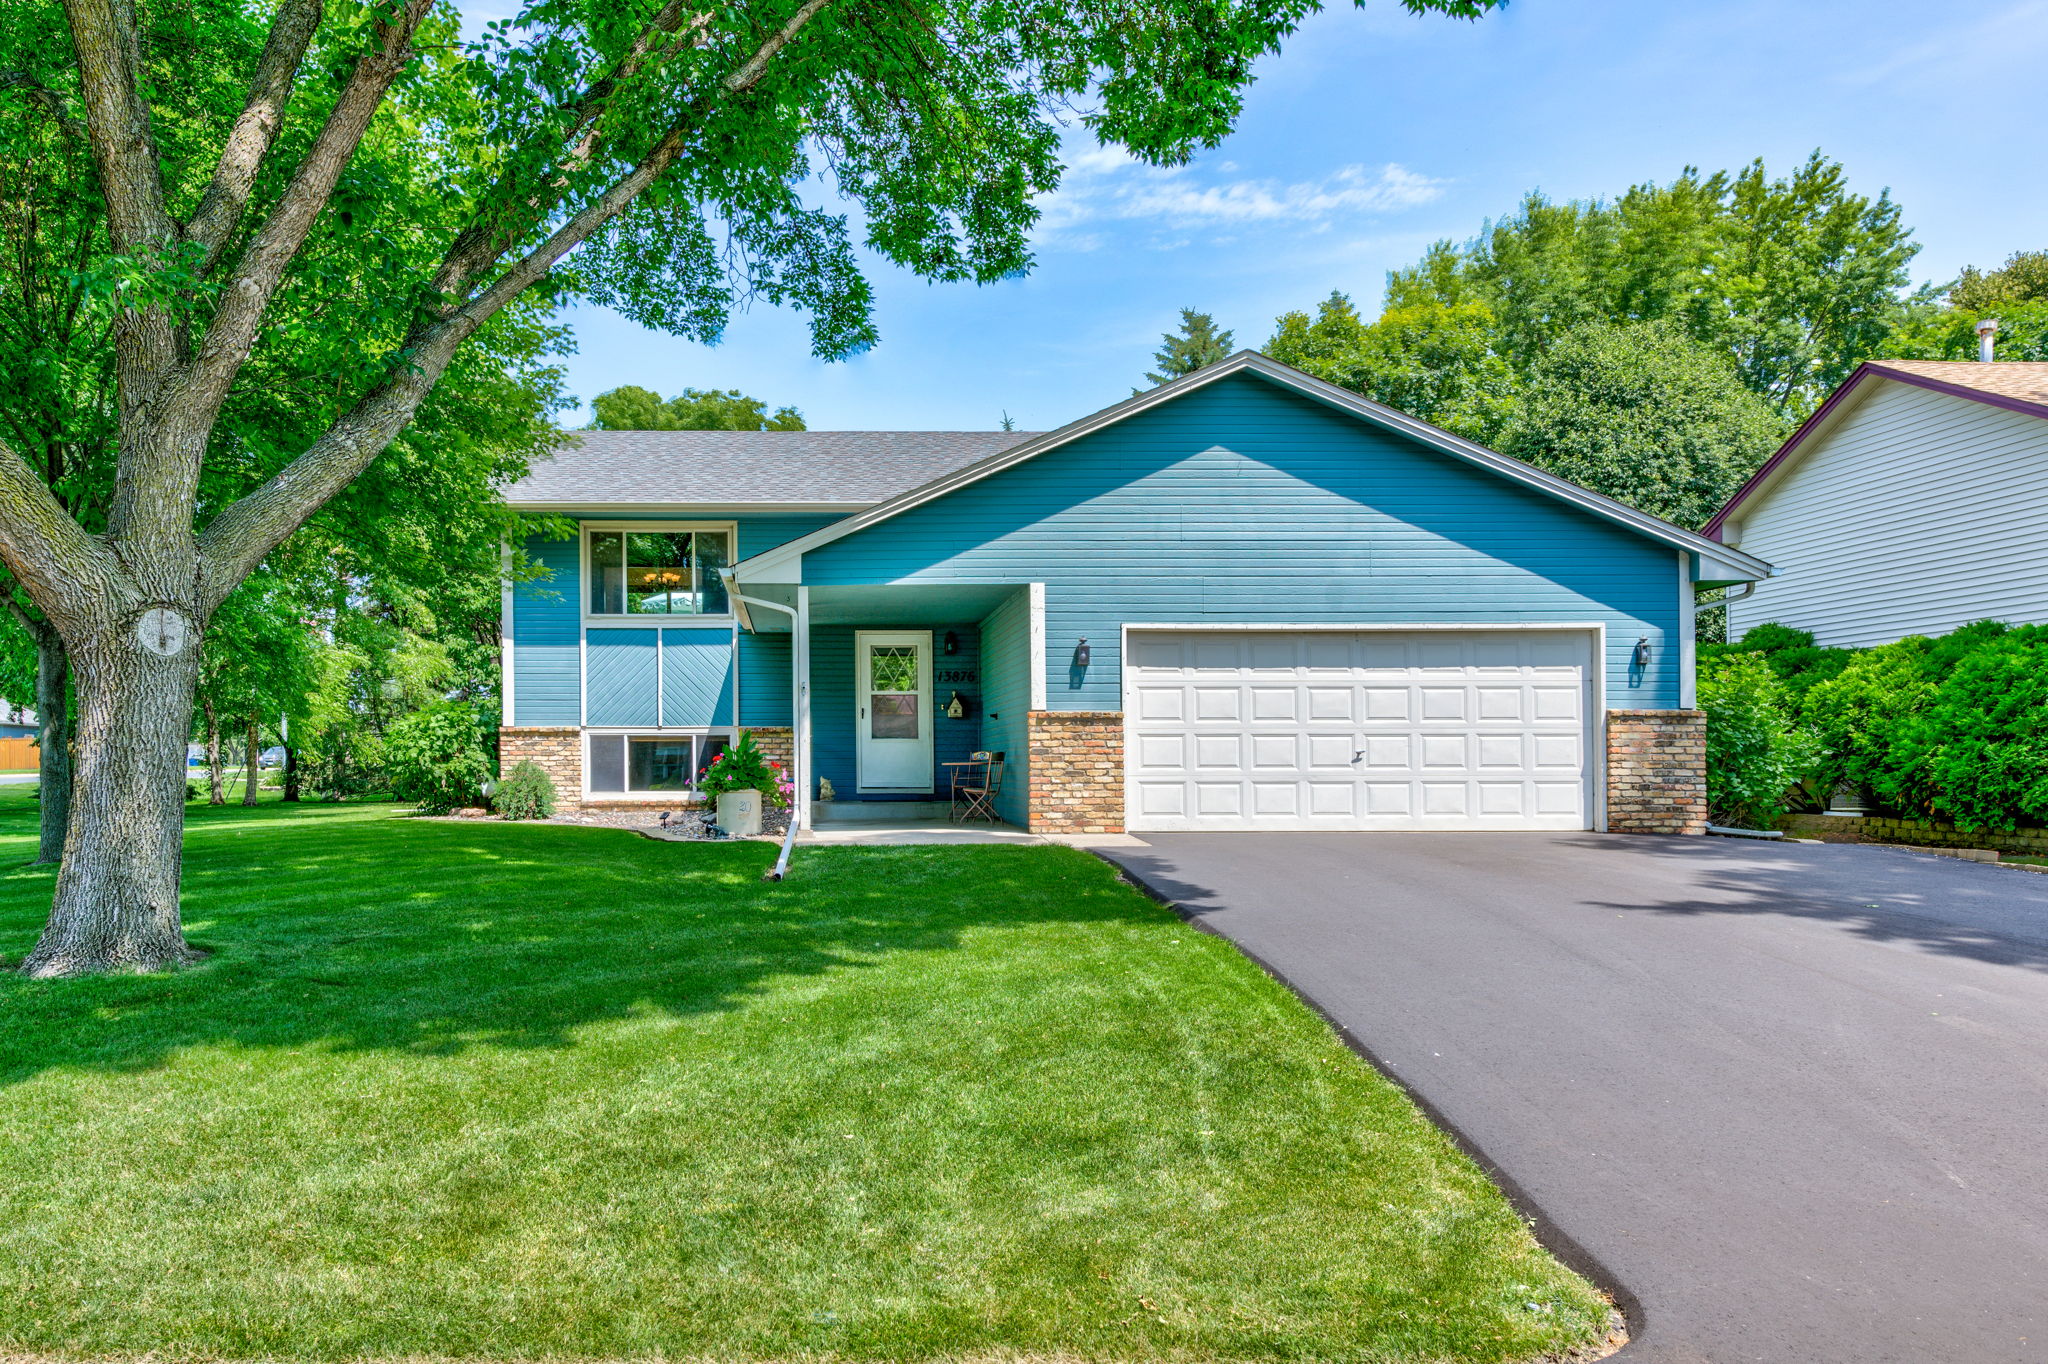  13876 89th Place N, Maple Grove, MN 55369, US